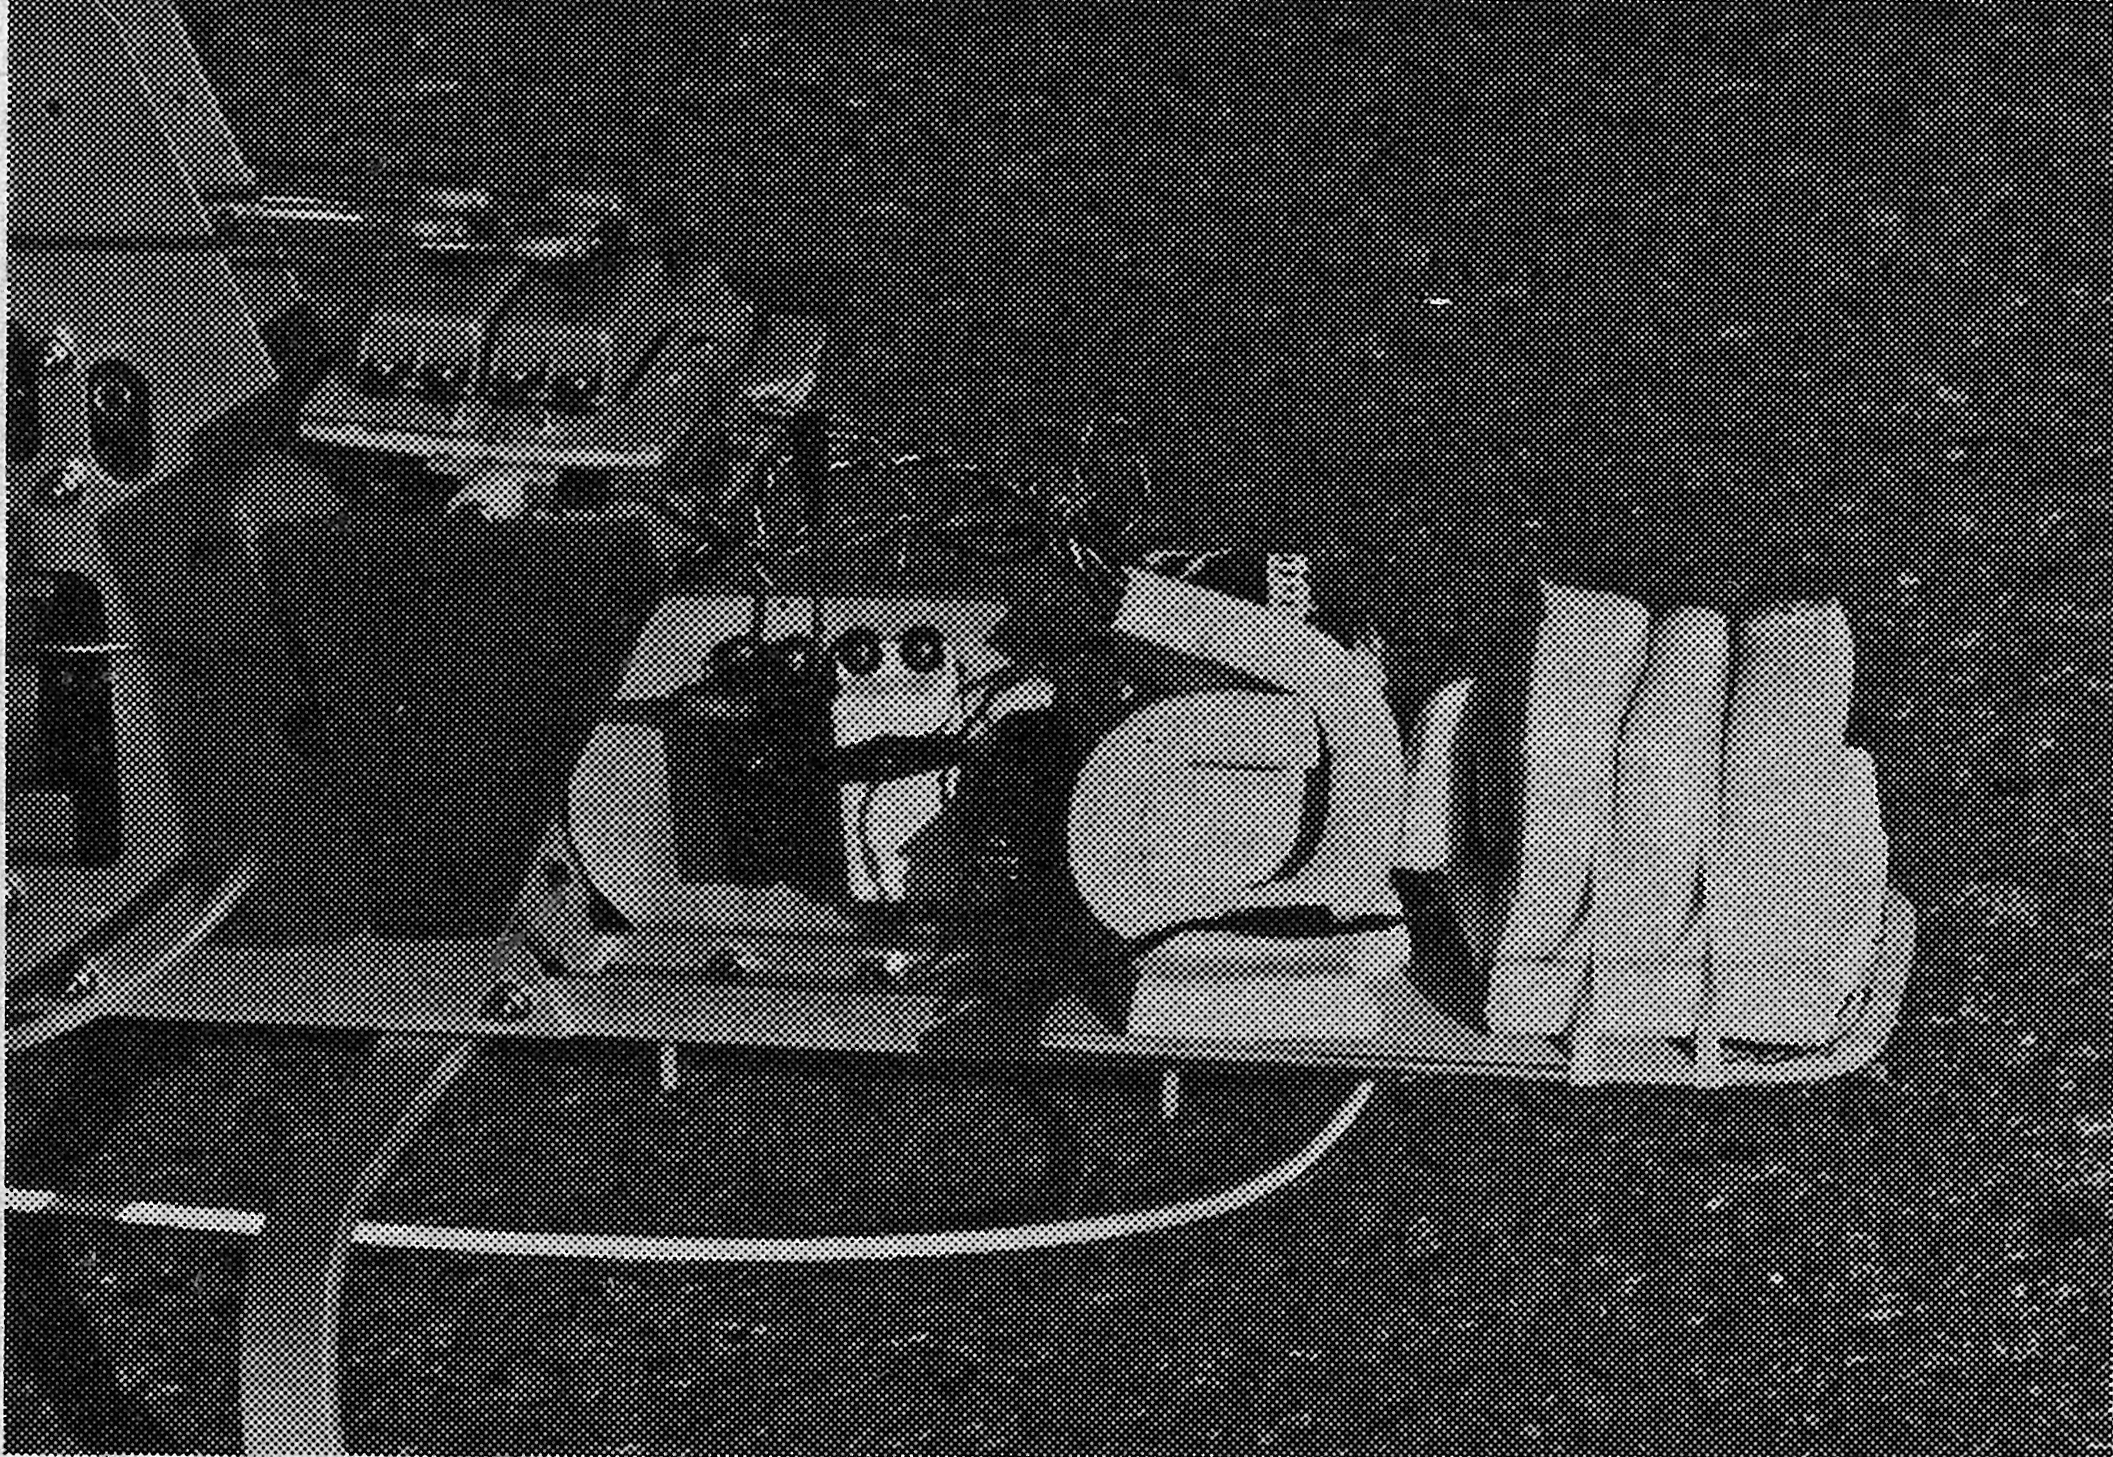 Photo at right, above, reveals spacious provision for the RC installation. The three servos on the upper tray control main rotor cyclic and tail rotor pitch. The white servo lower down moves the tray to provide collective pitch and tail rotor mix. The fif